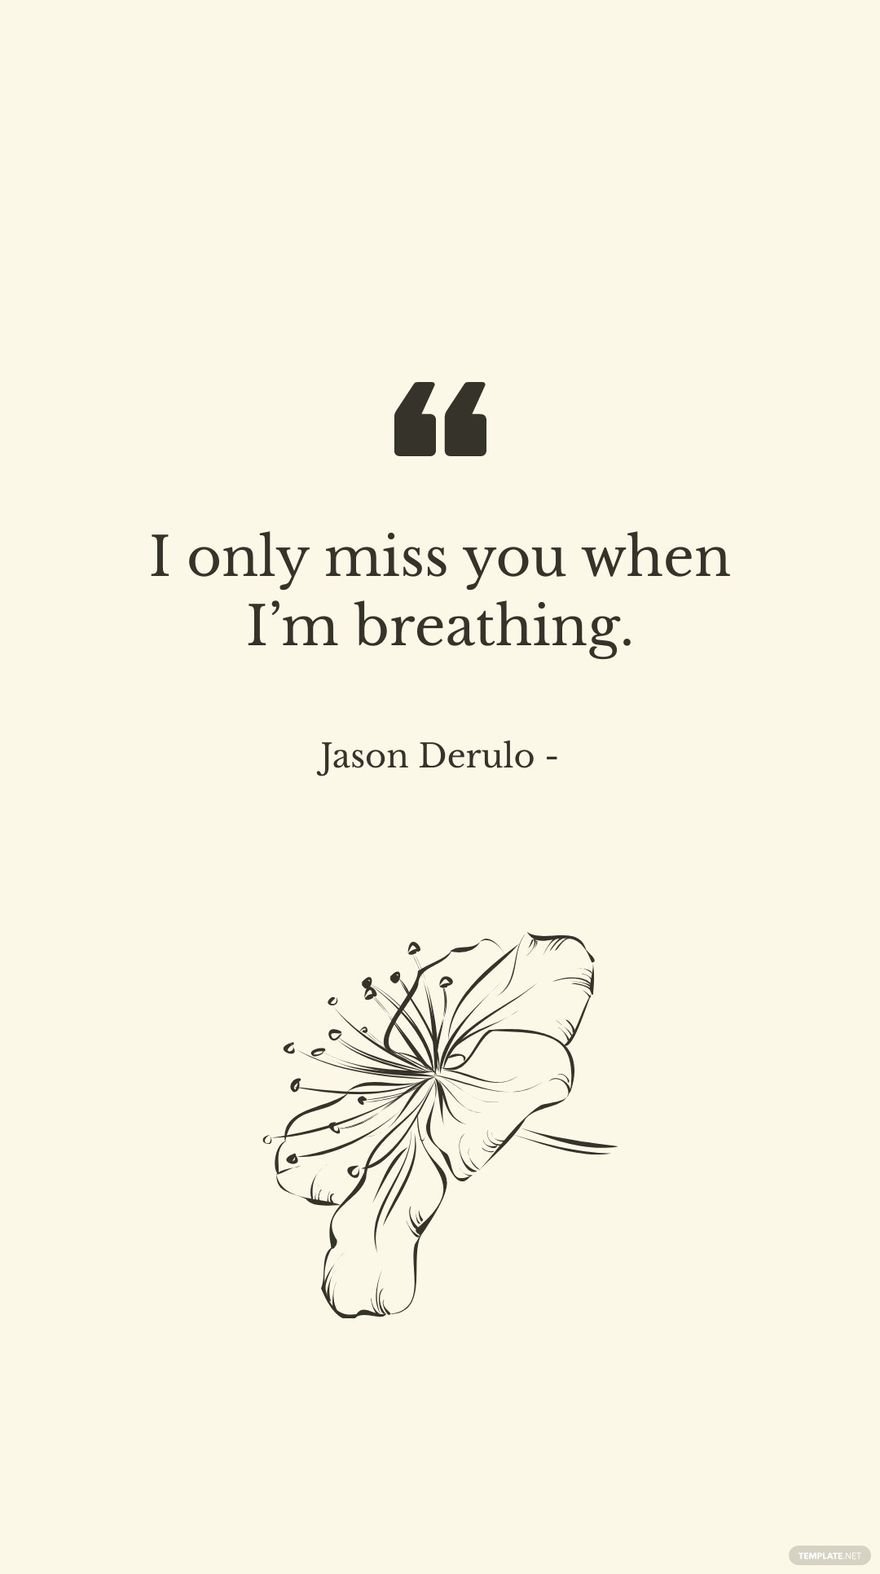 Free Jason Derulo - I only miss you when I’m breathing.